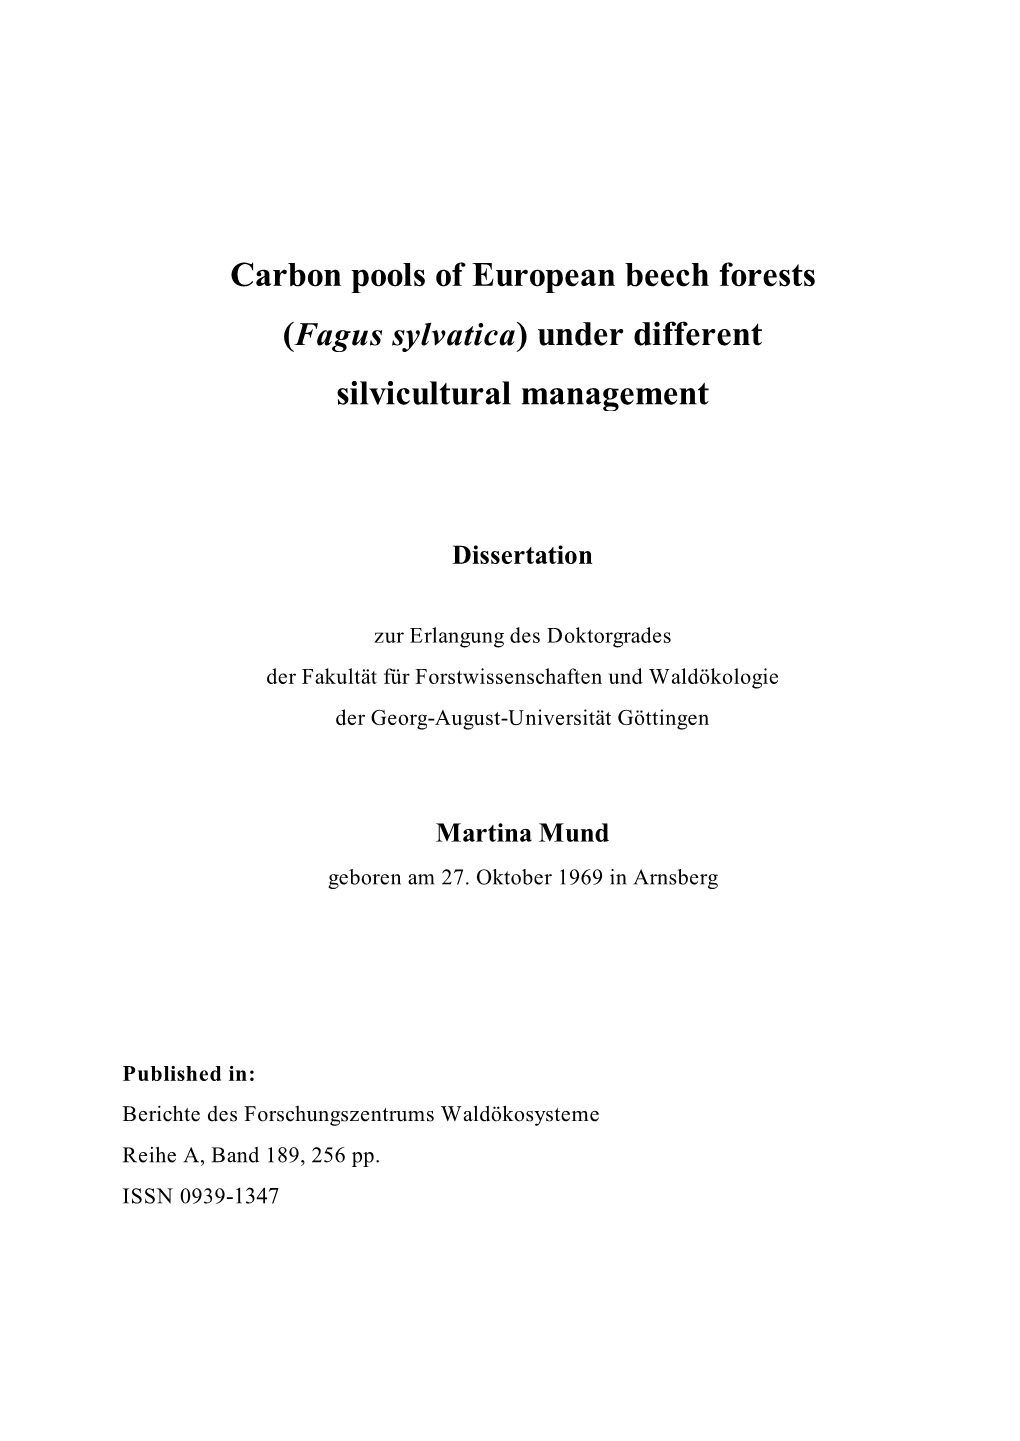 Carbon Pools of European Beech Forests (Fagus Sylvatica) Under Different Silvicultural Management